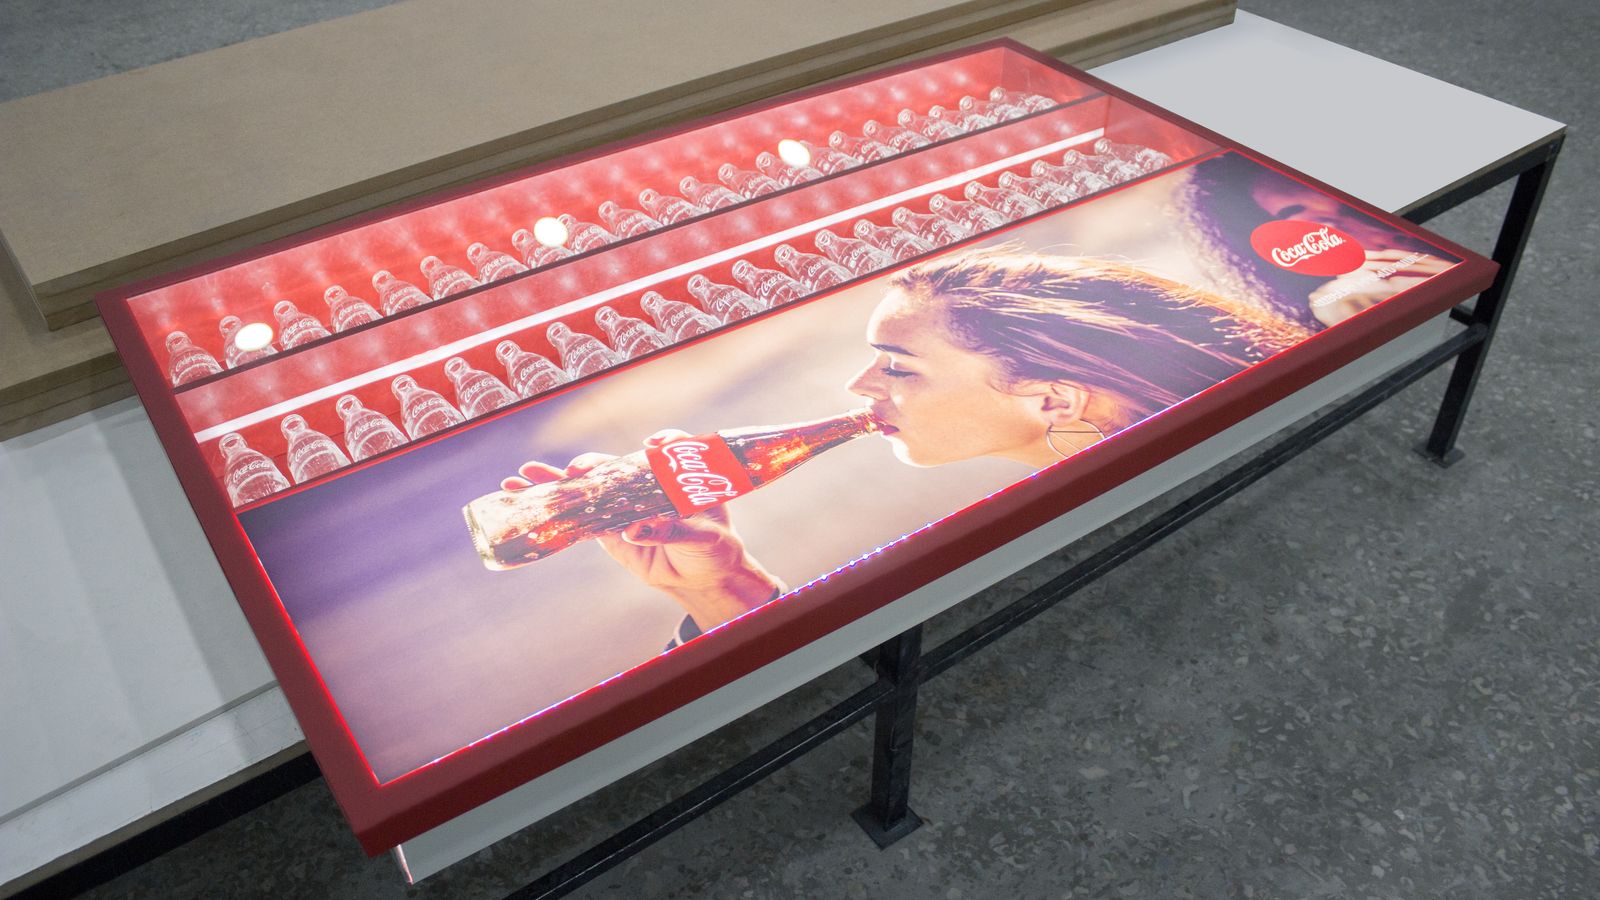 Coca-Cola LED light box with branded bottles made of aluminum and backlit vinyl